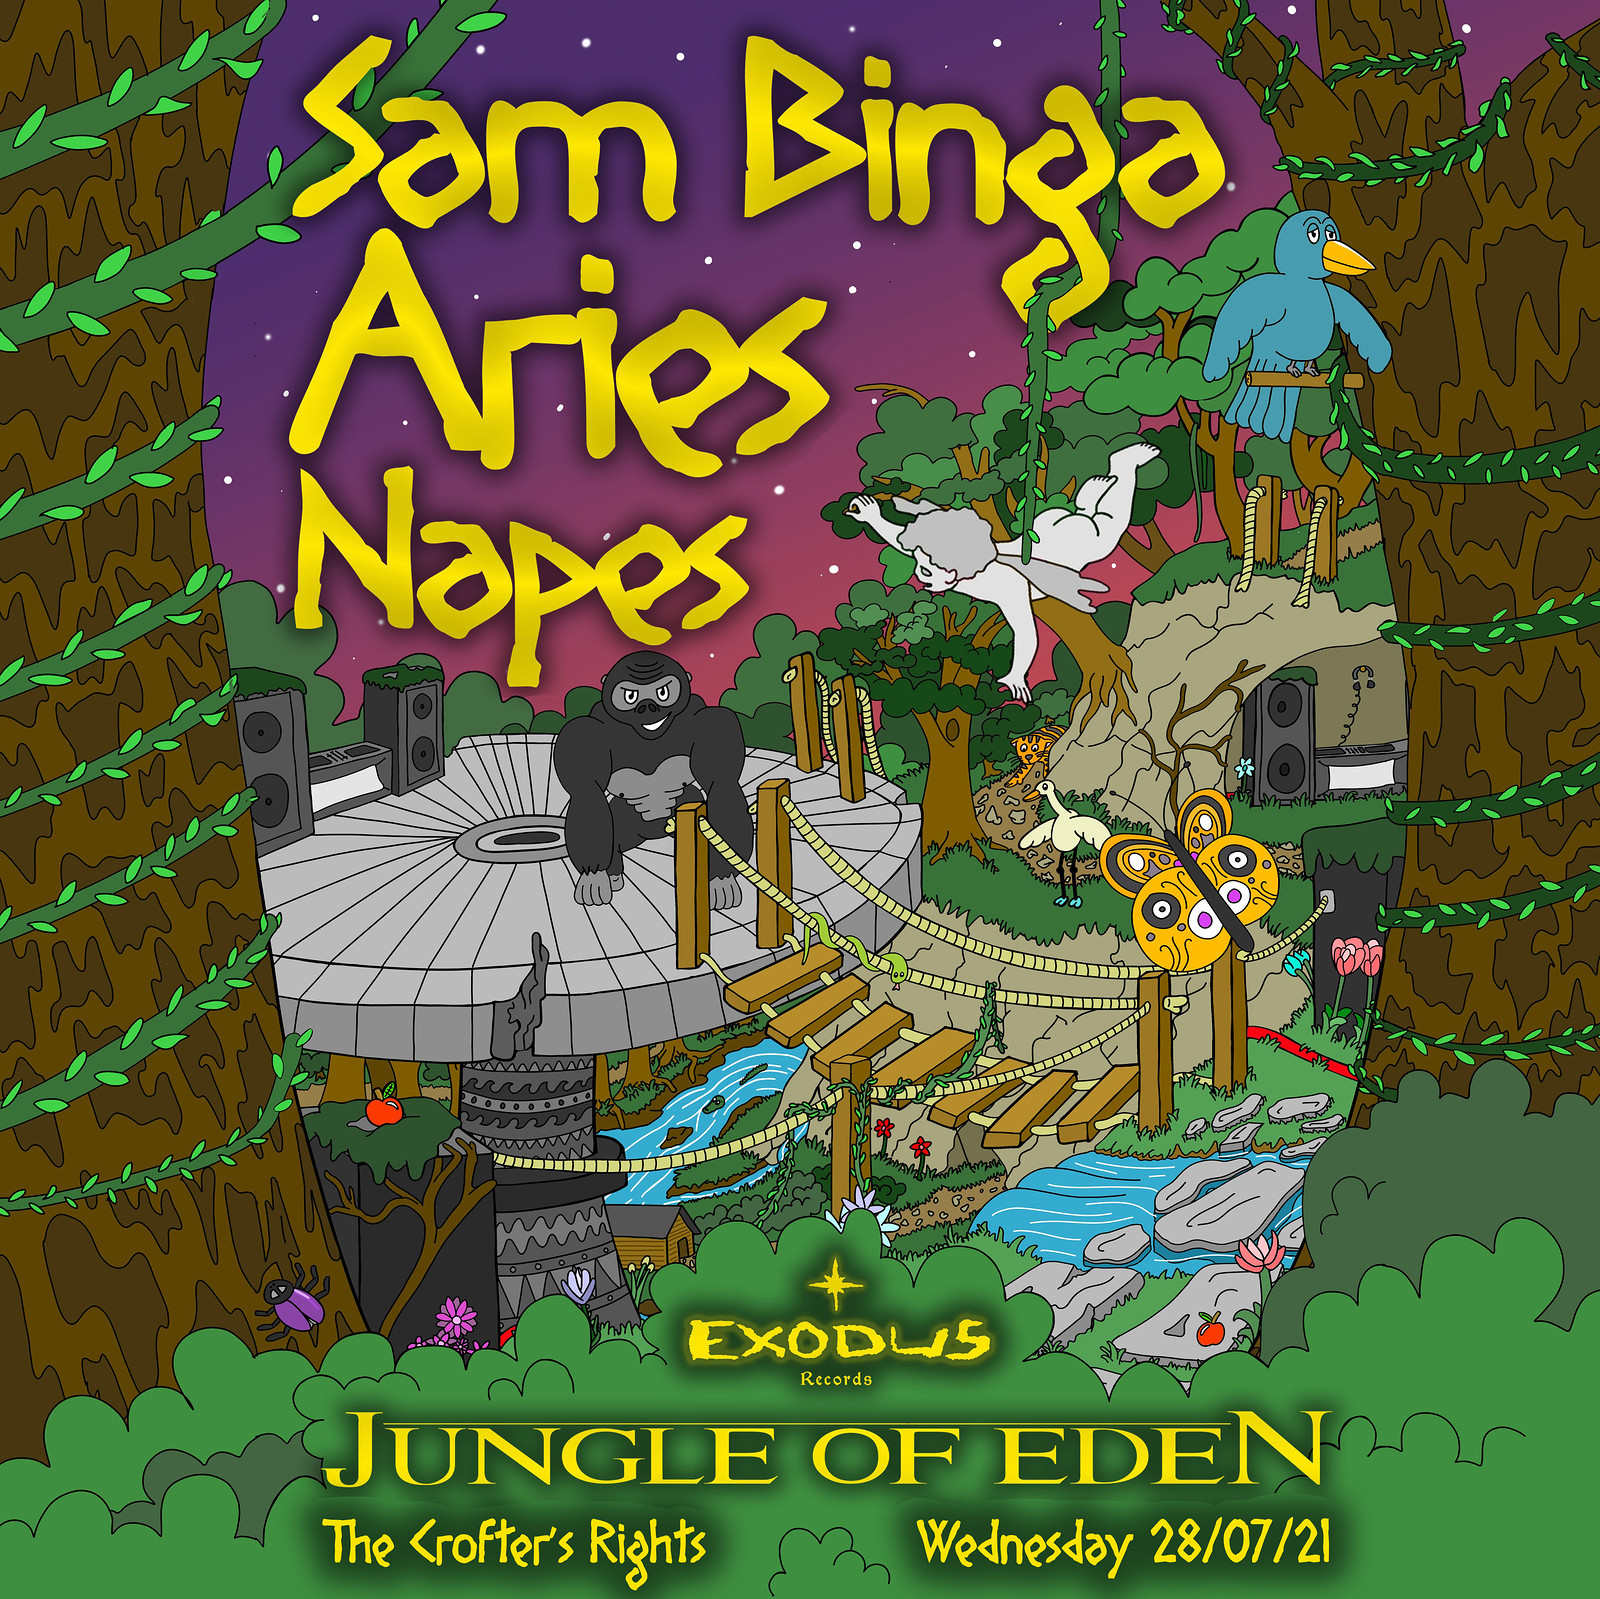 Exodus Presents Jungle Of Eden at Crofters Rights